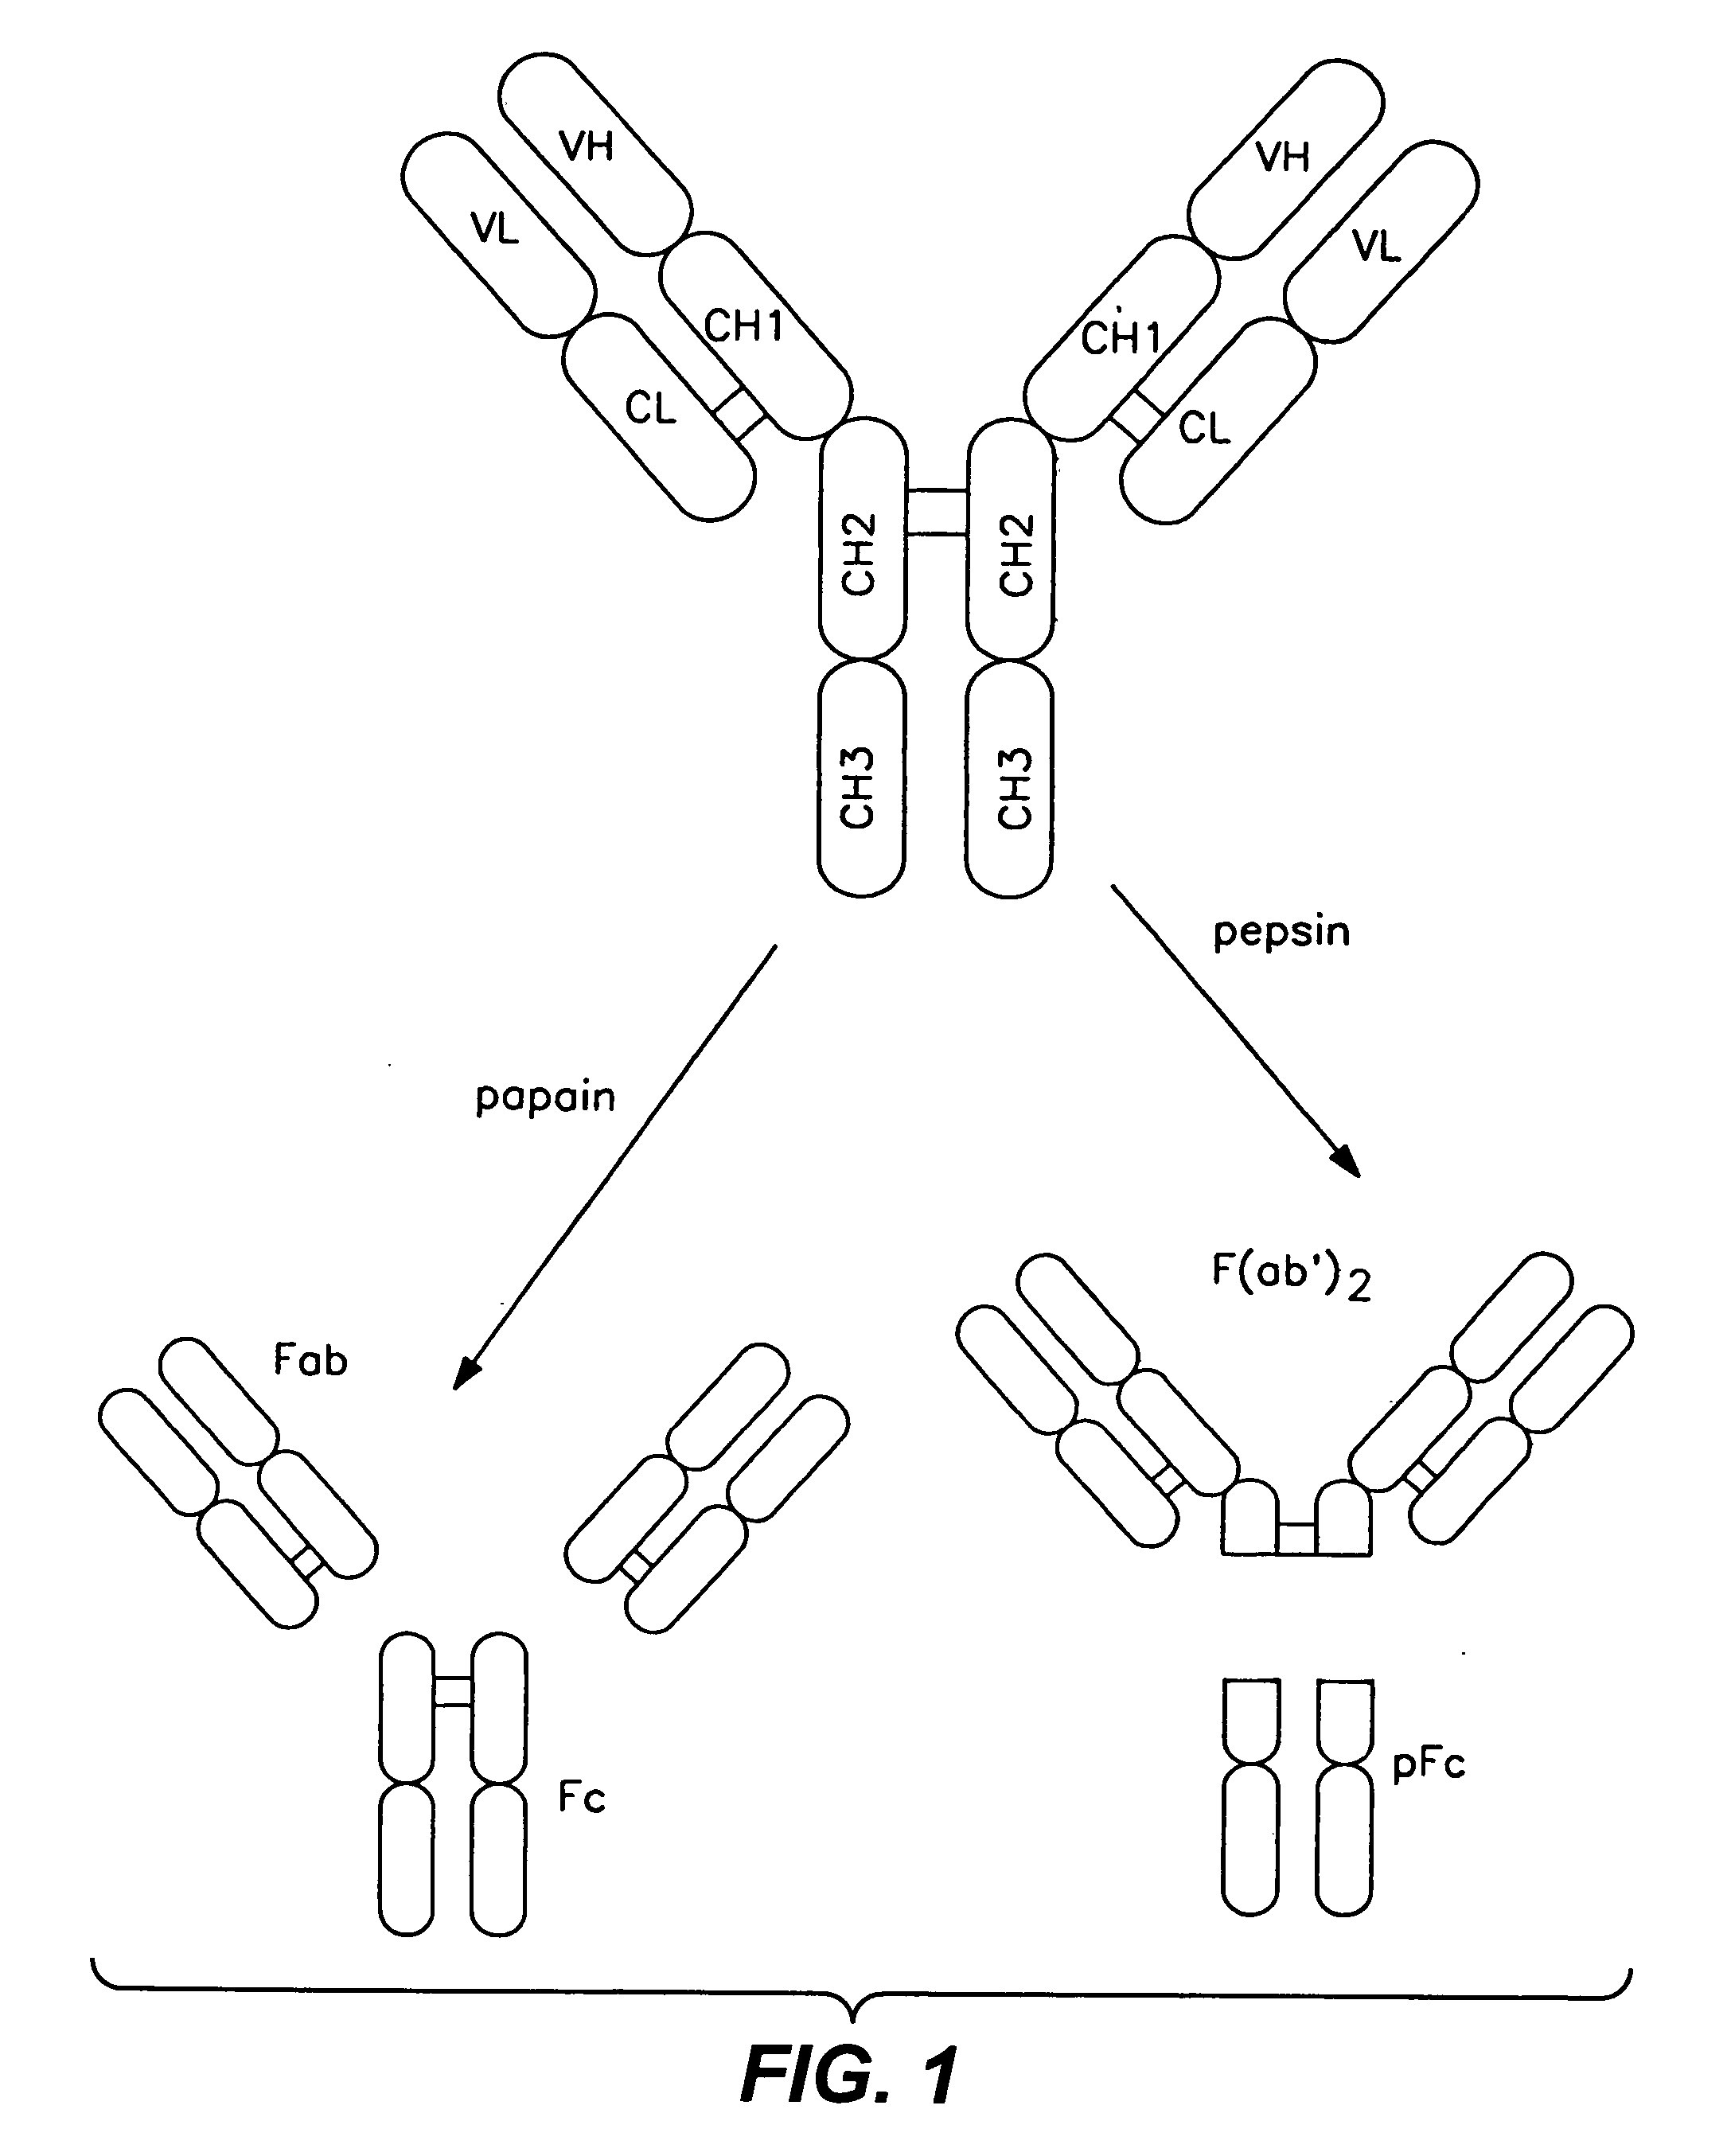 Polypeptide variants with altered effector function